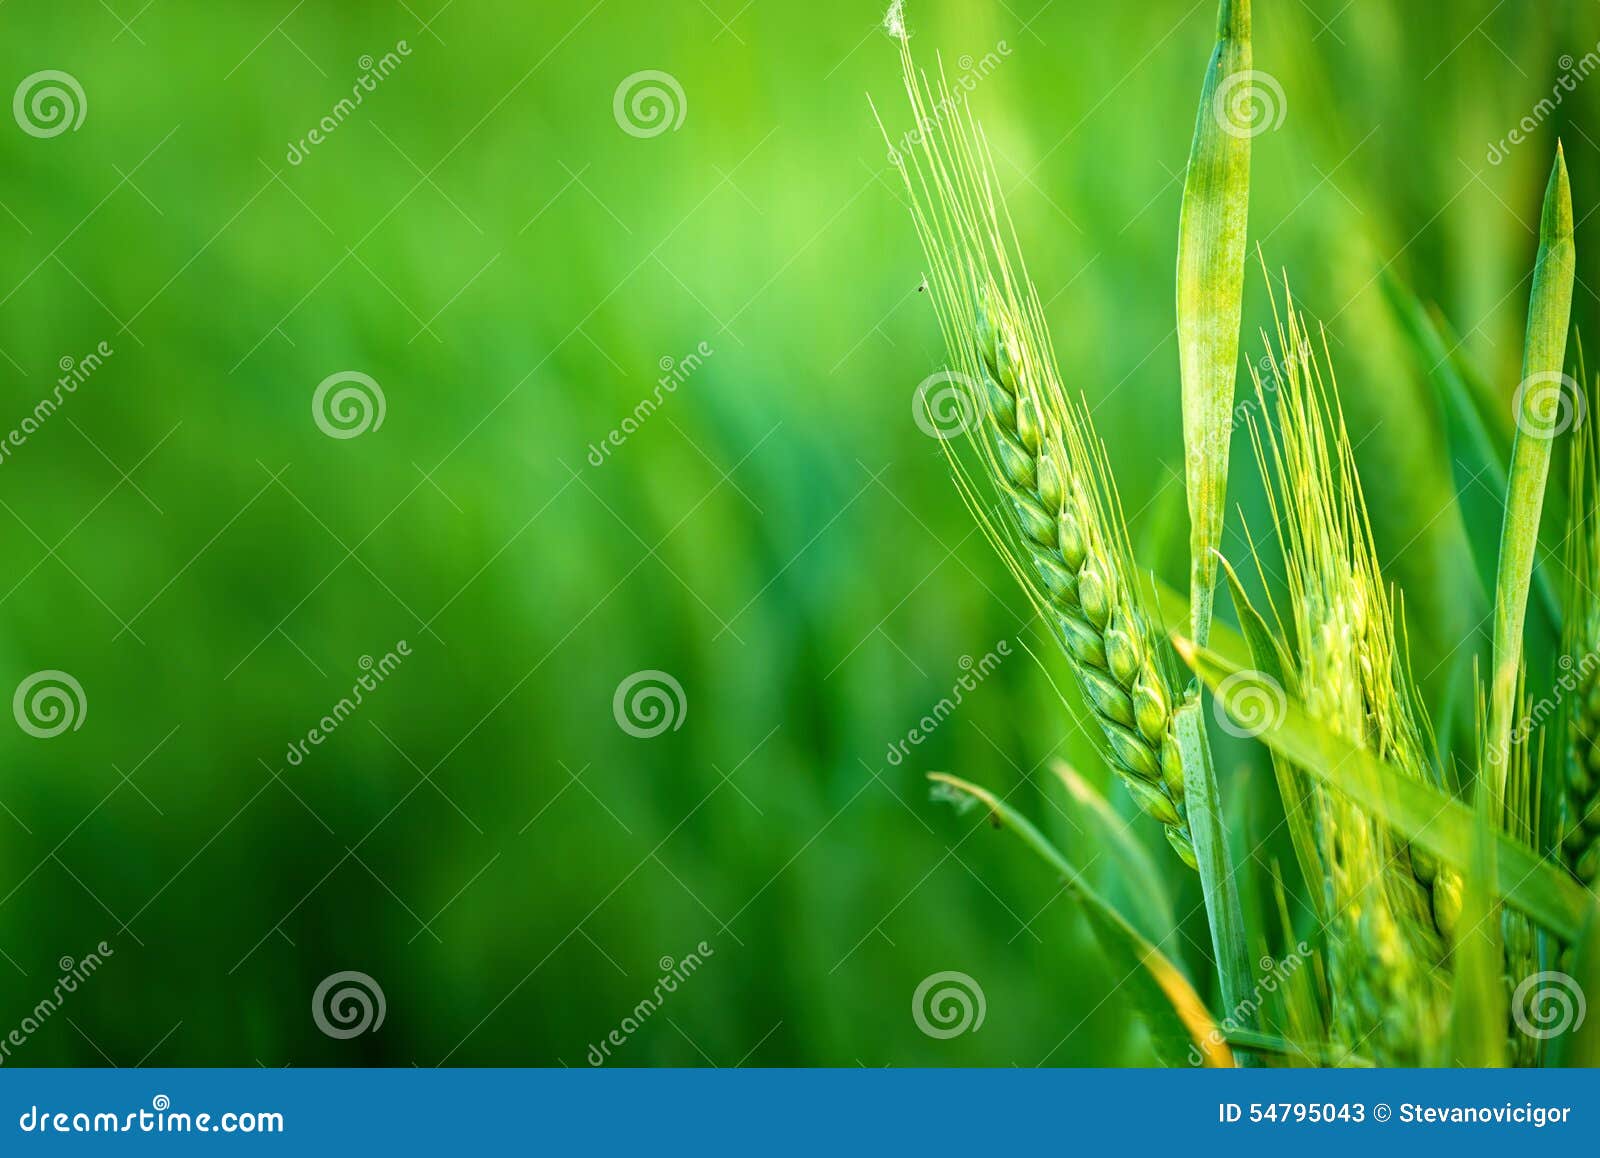 green wheat head in cultivated agricultural field